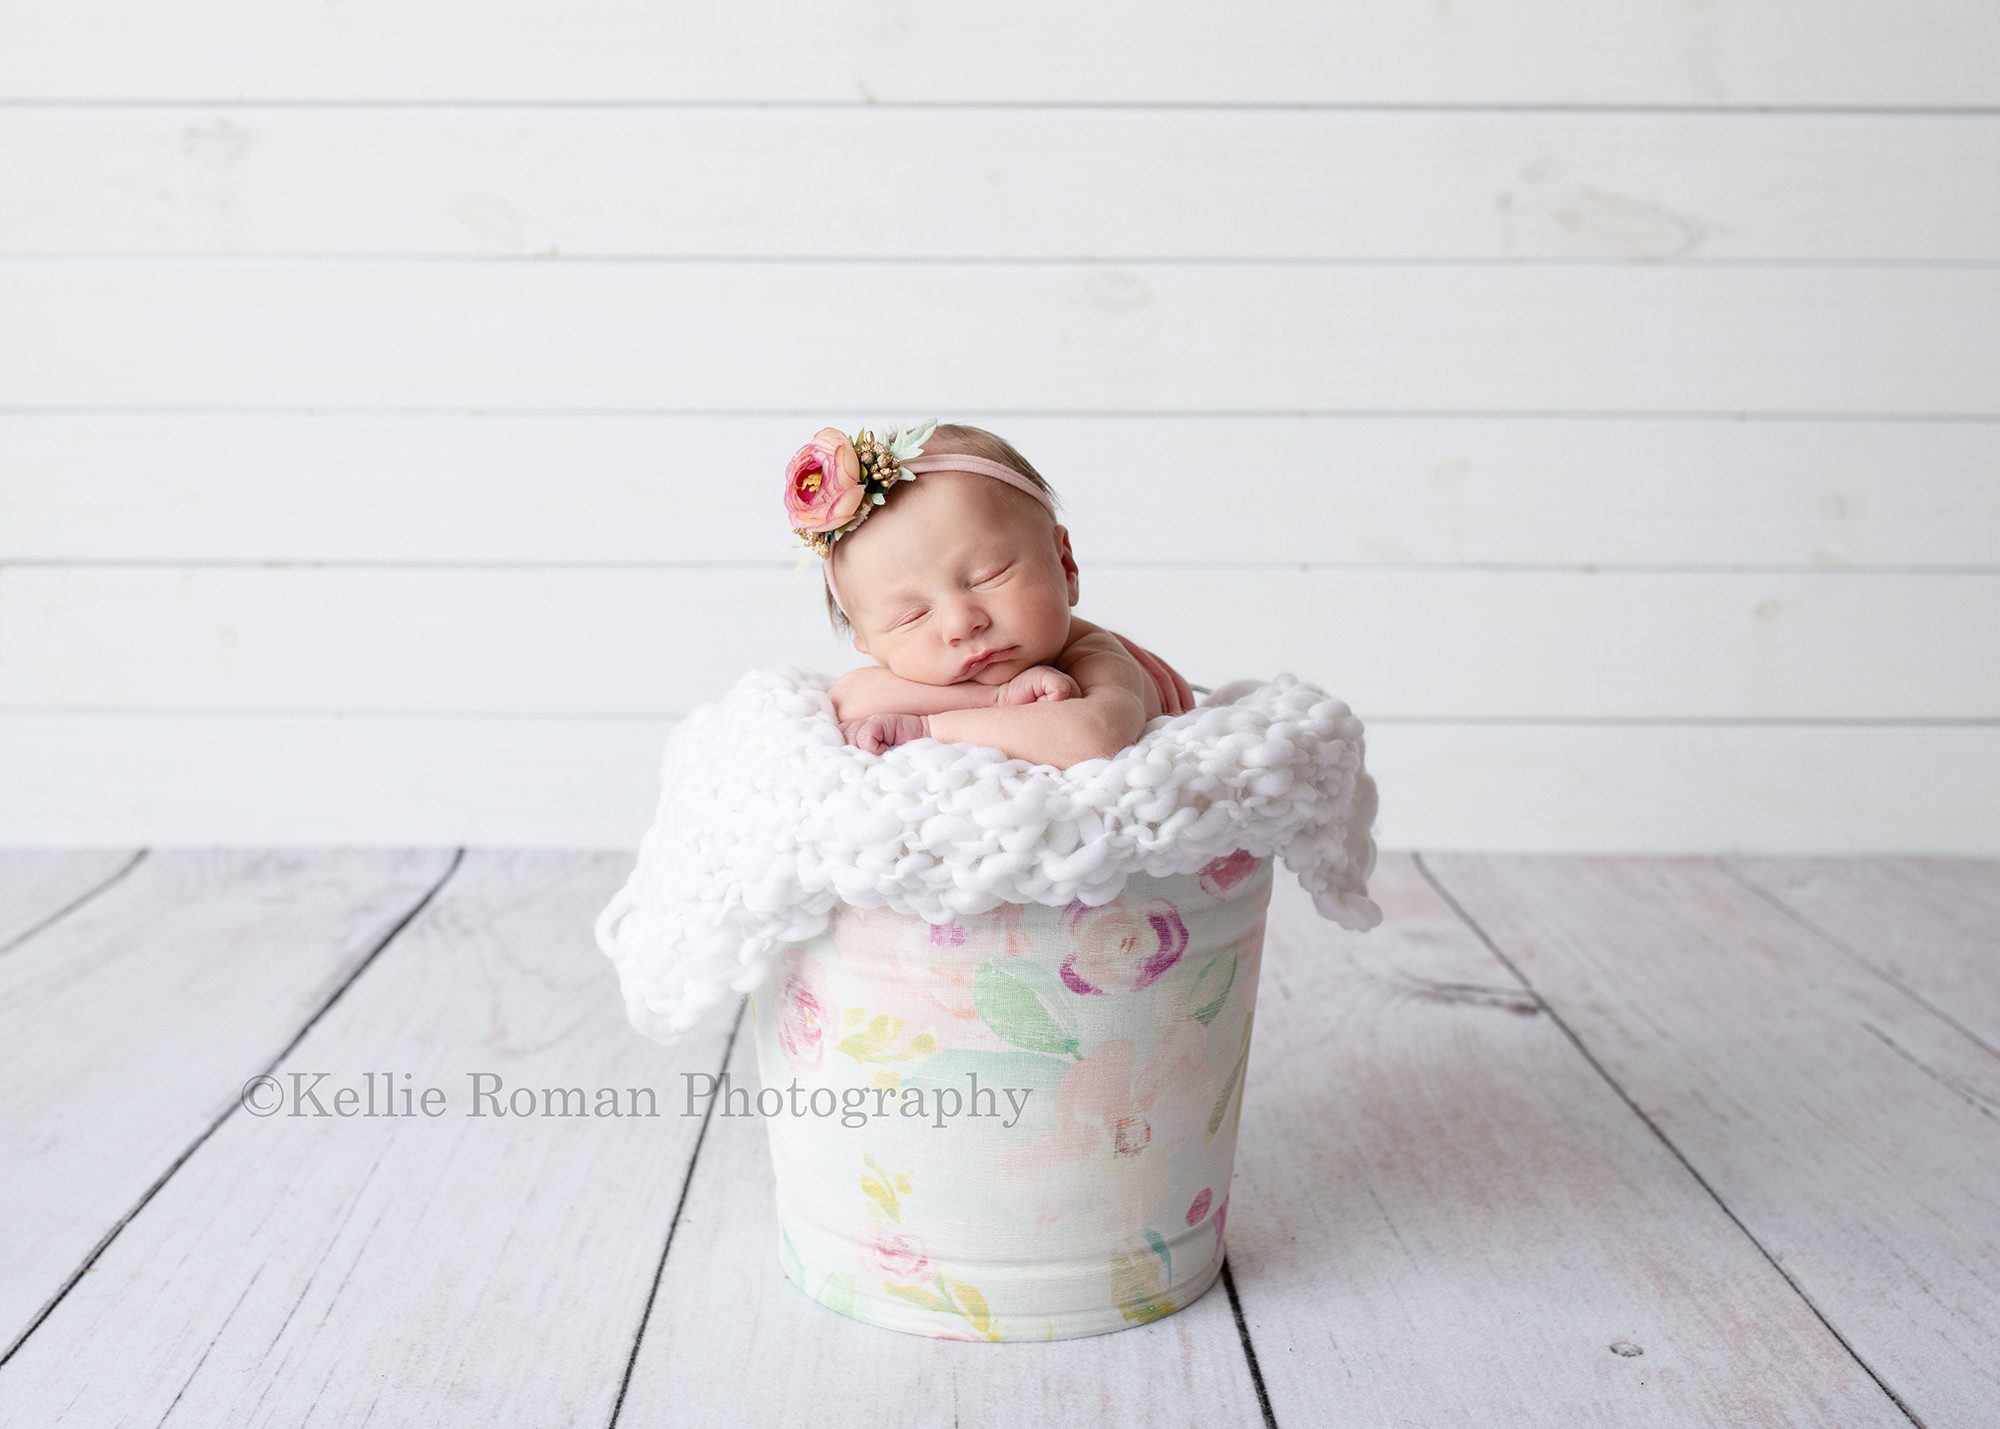 milwaukee baby whisperer a newborn infant girl in a milwaukee photographers studio she is posed in a vintage floral bucket with a white knitted blanket in it. she has her chin resting on her arms in the bucket and she has a pink and gold flower headband on. the floor is white wood, and she is in front of a white wood shiplap backdrop.